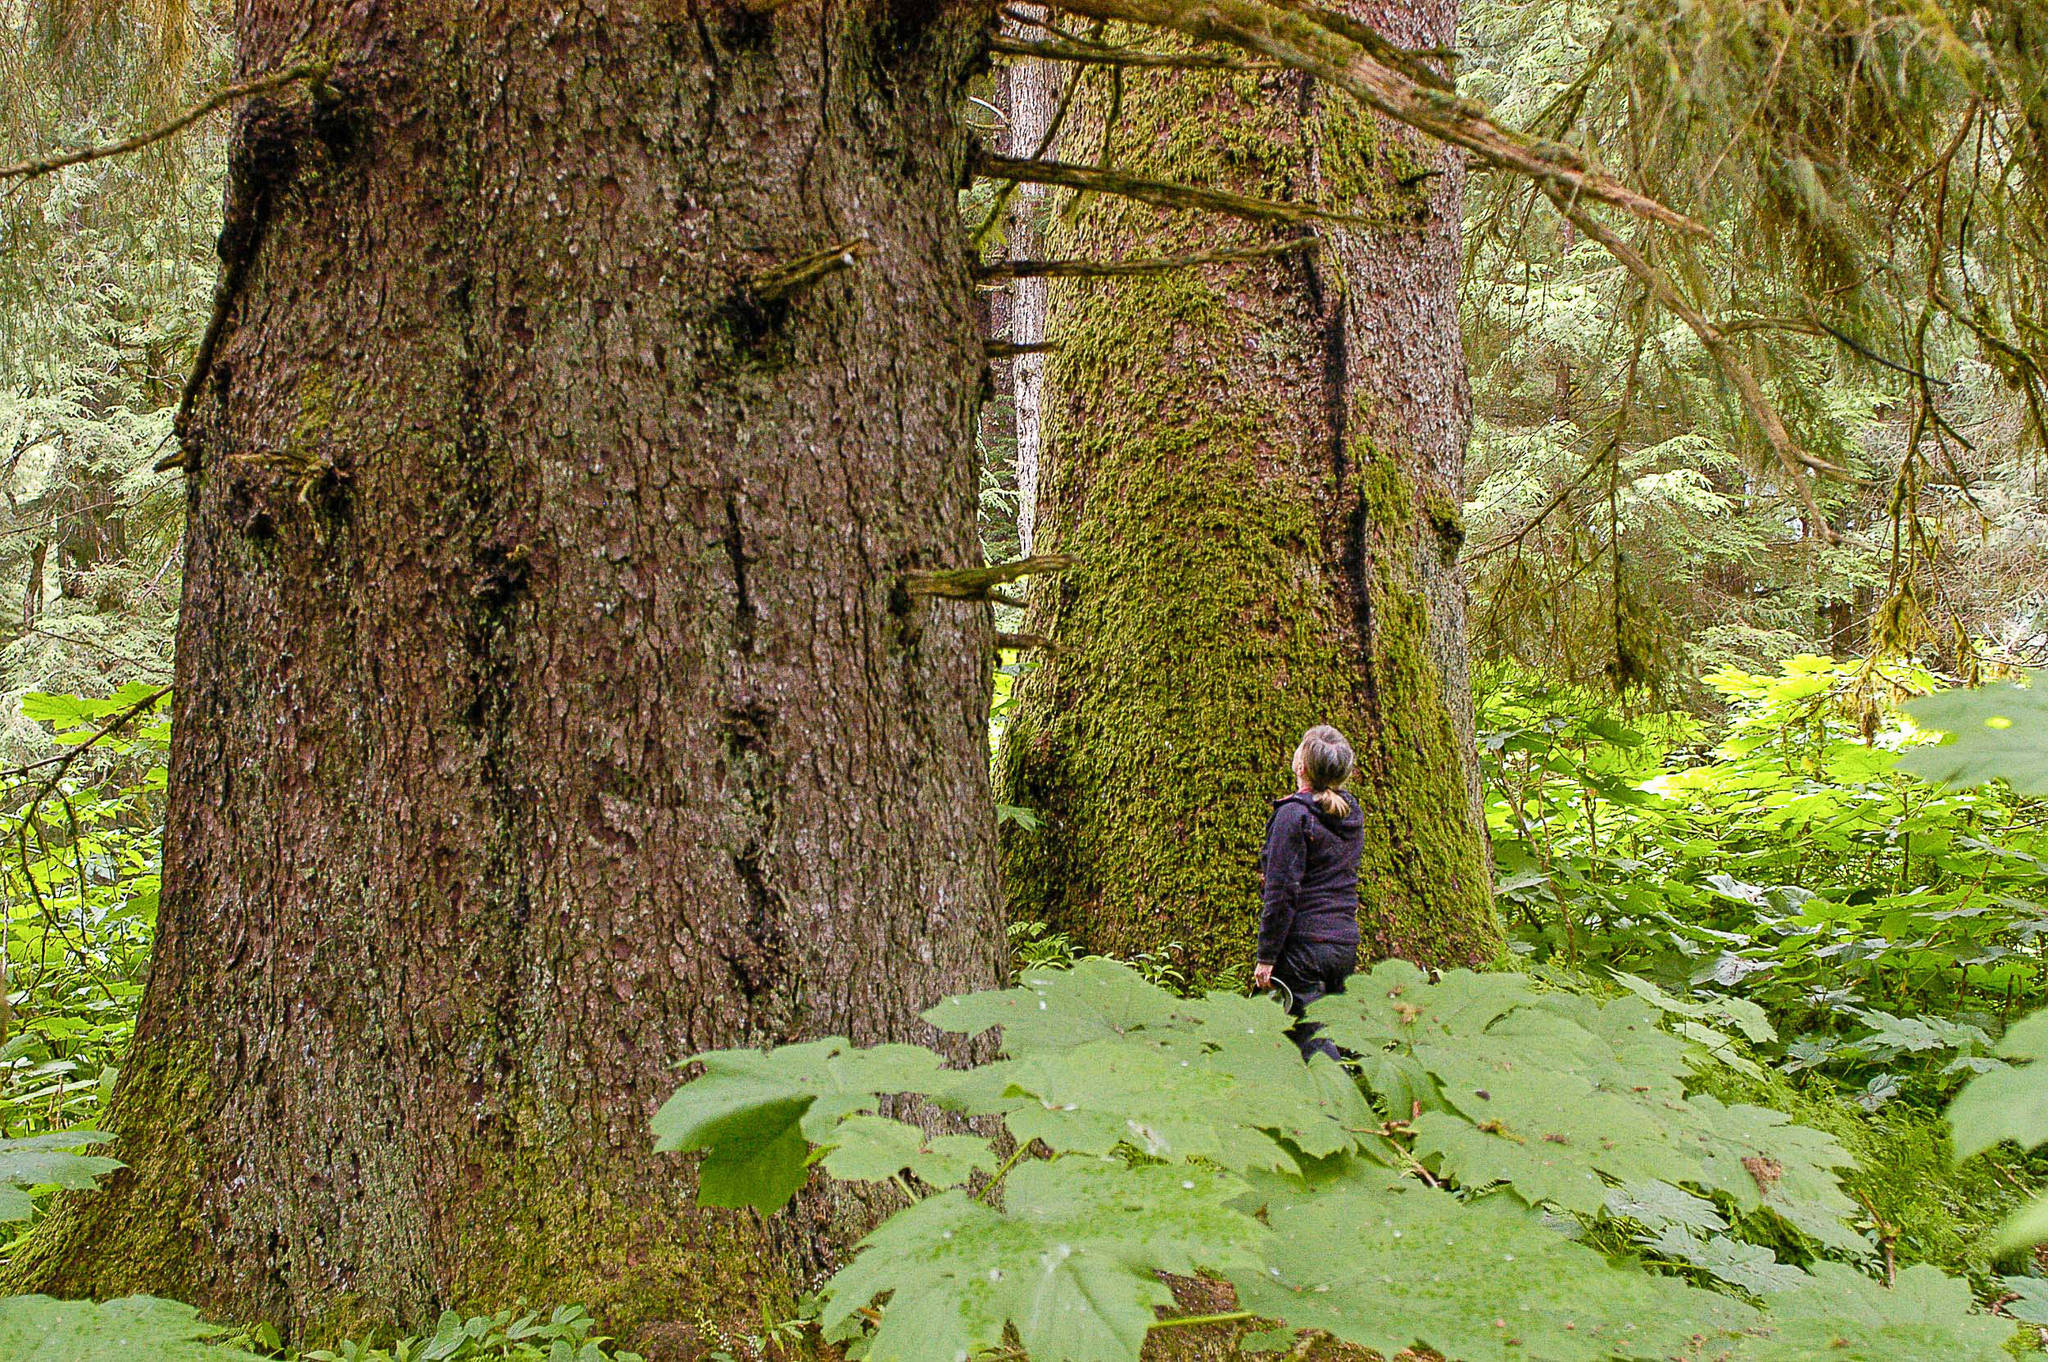 Photos courtesy John Schoen
Mary Beth Schoen admires a large-tree old-growth stand in Saook Bay on northeastern Baranof Island. Some individual trees were over 6 feet in diameter and many centuries old. This riparian area was adjacent to a salmon stream and was full of bear trails. Large-tree old growth stands are rare on the Tongass.